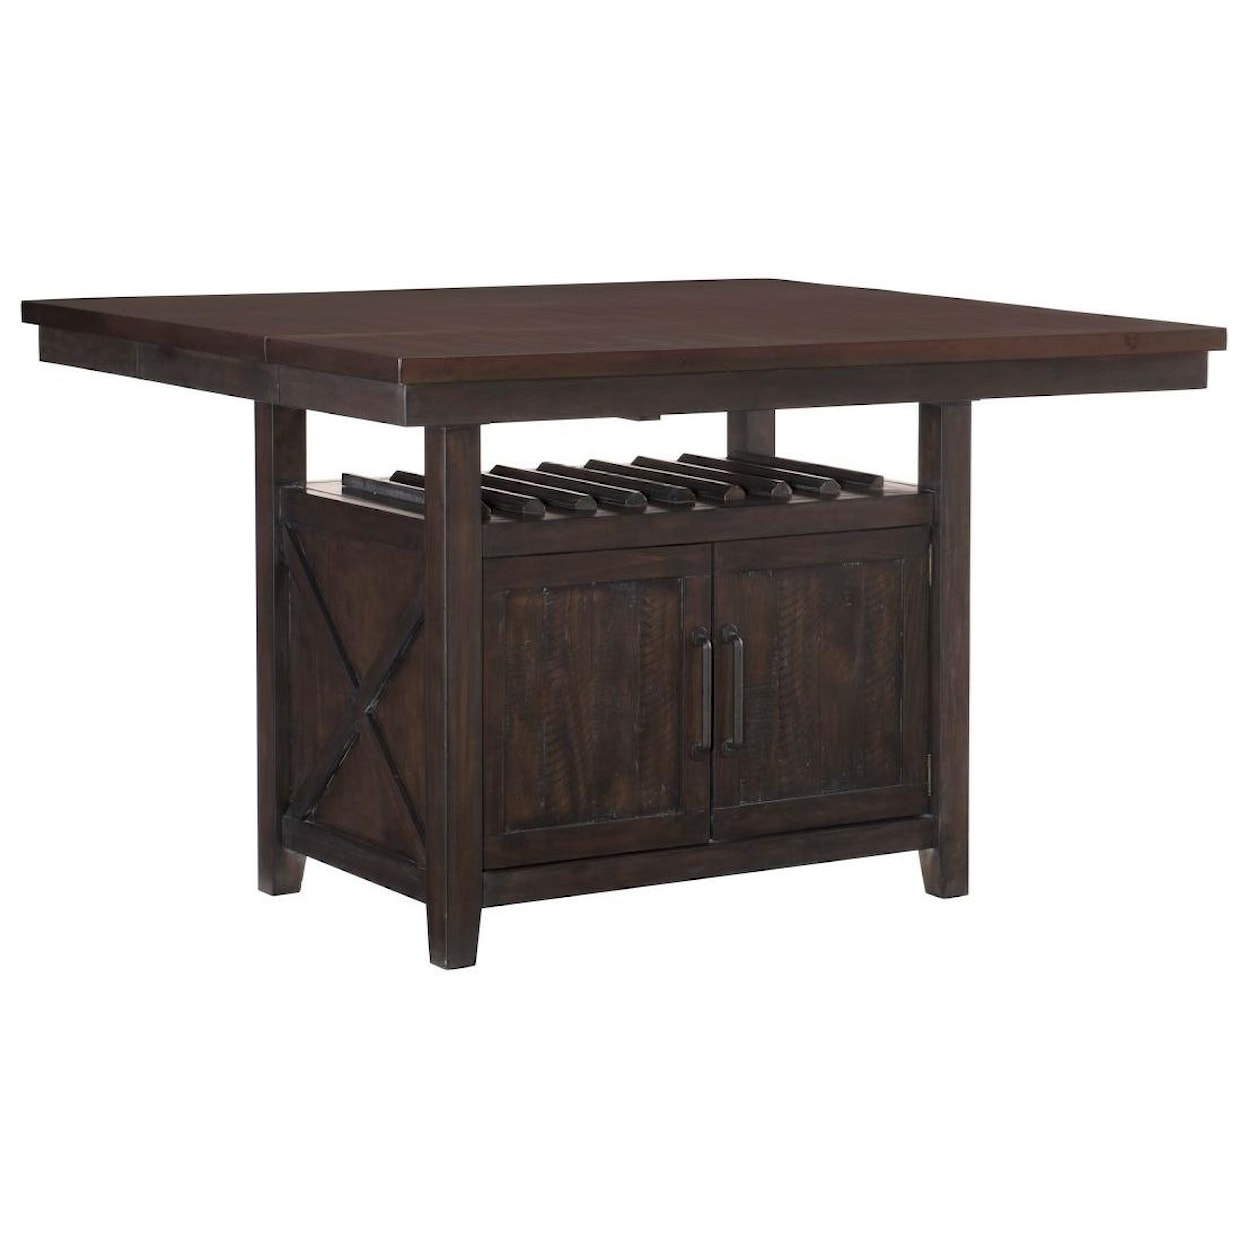 Homelegance Oxton Counter Height Table